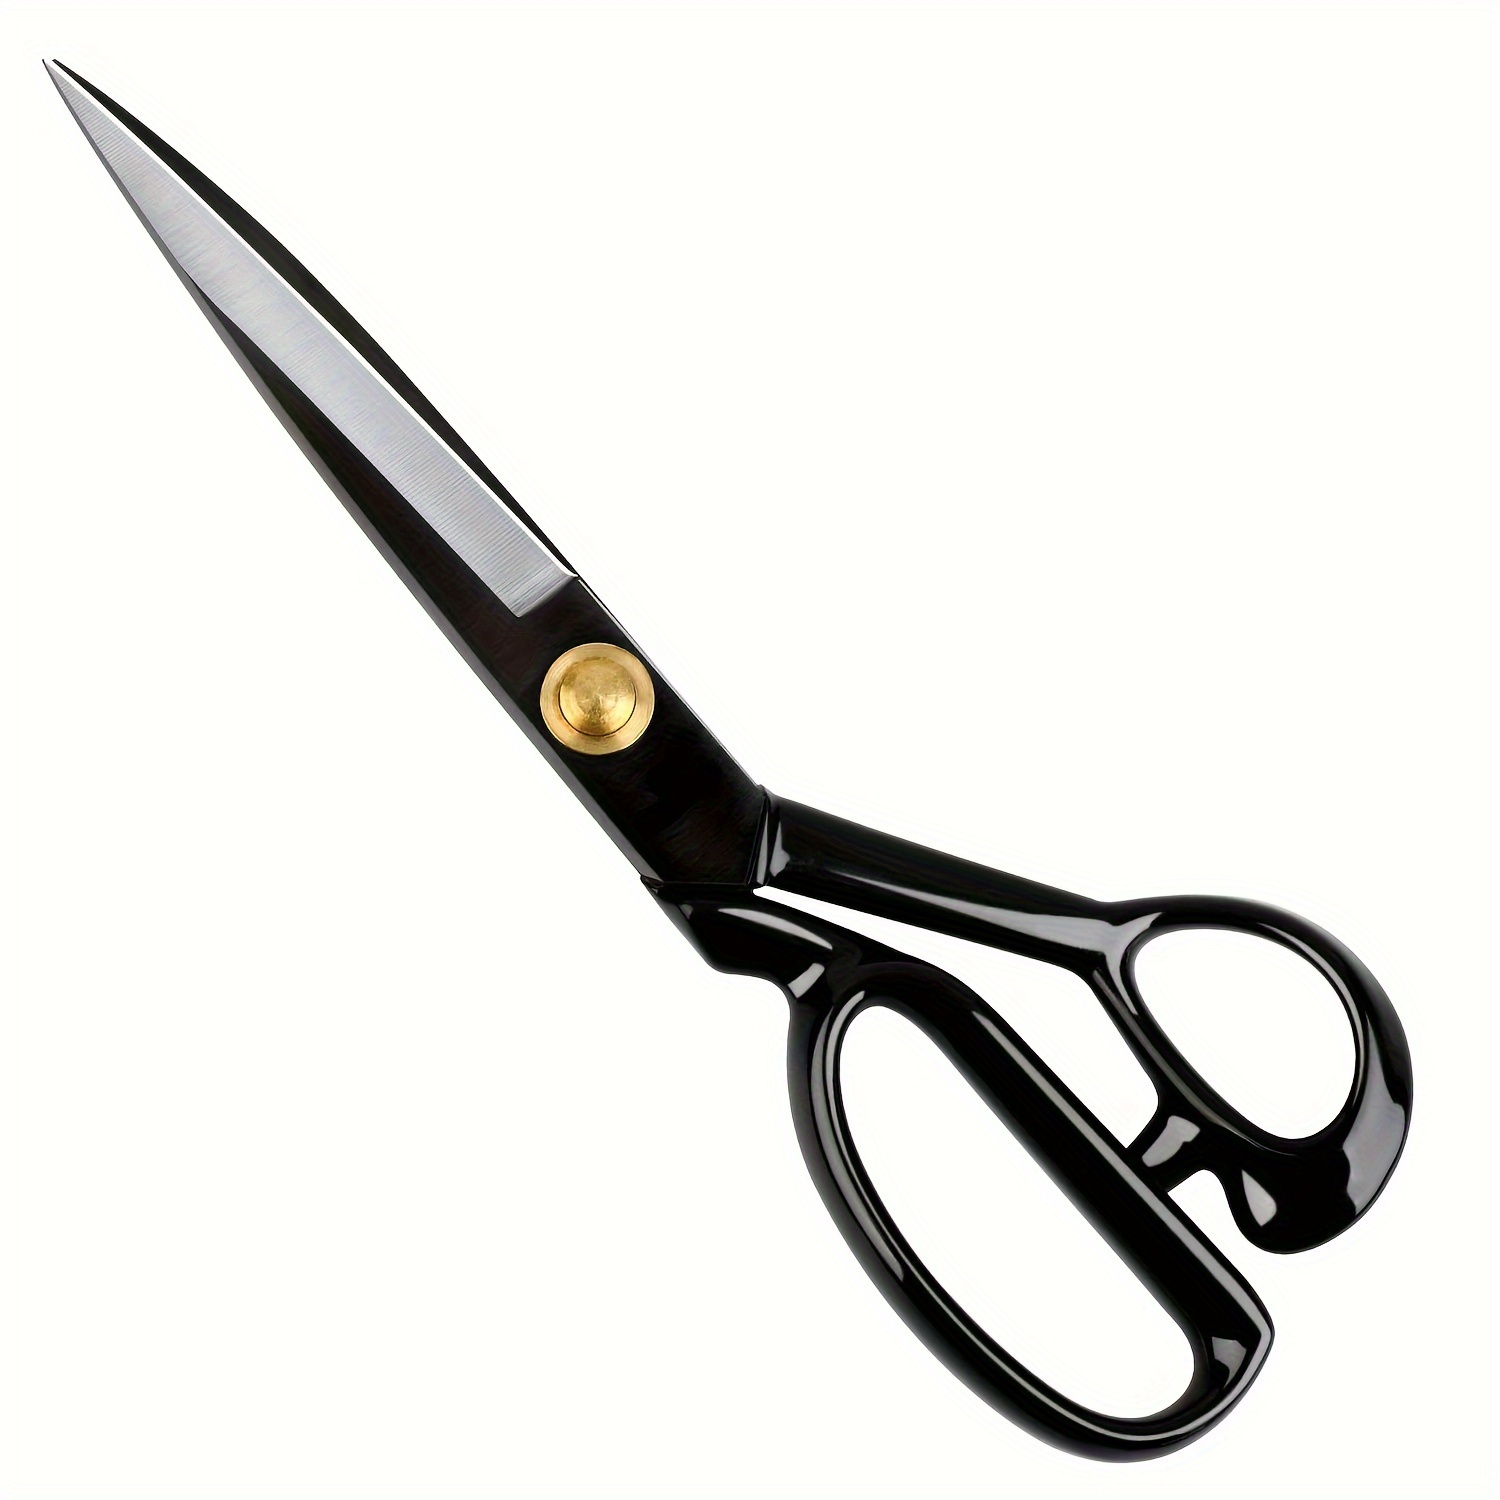 Professional Heavy Duty Sewing Tailor Scissors - 8cm (3 inch